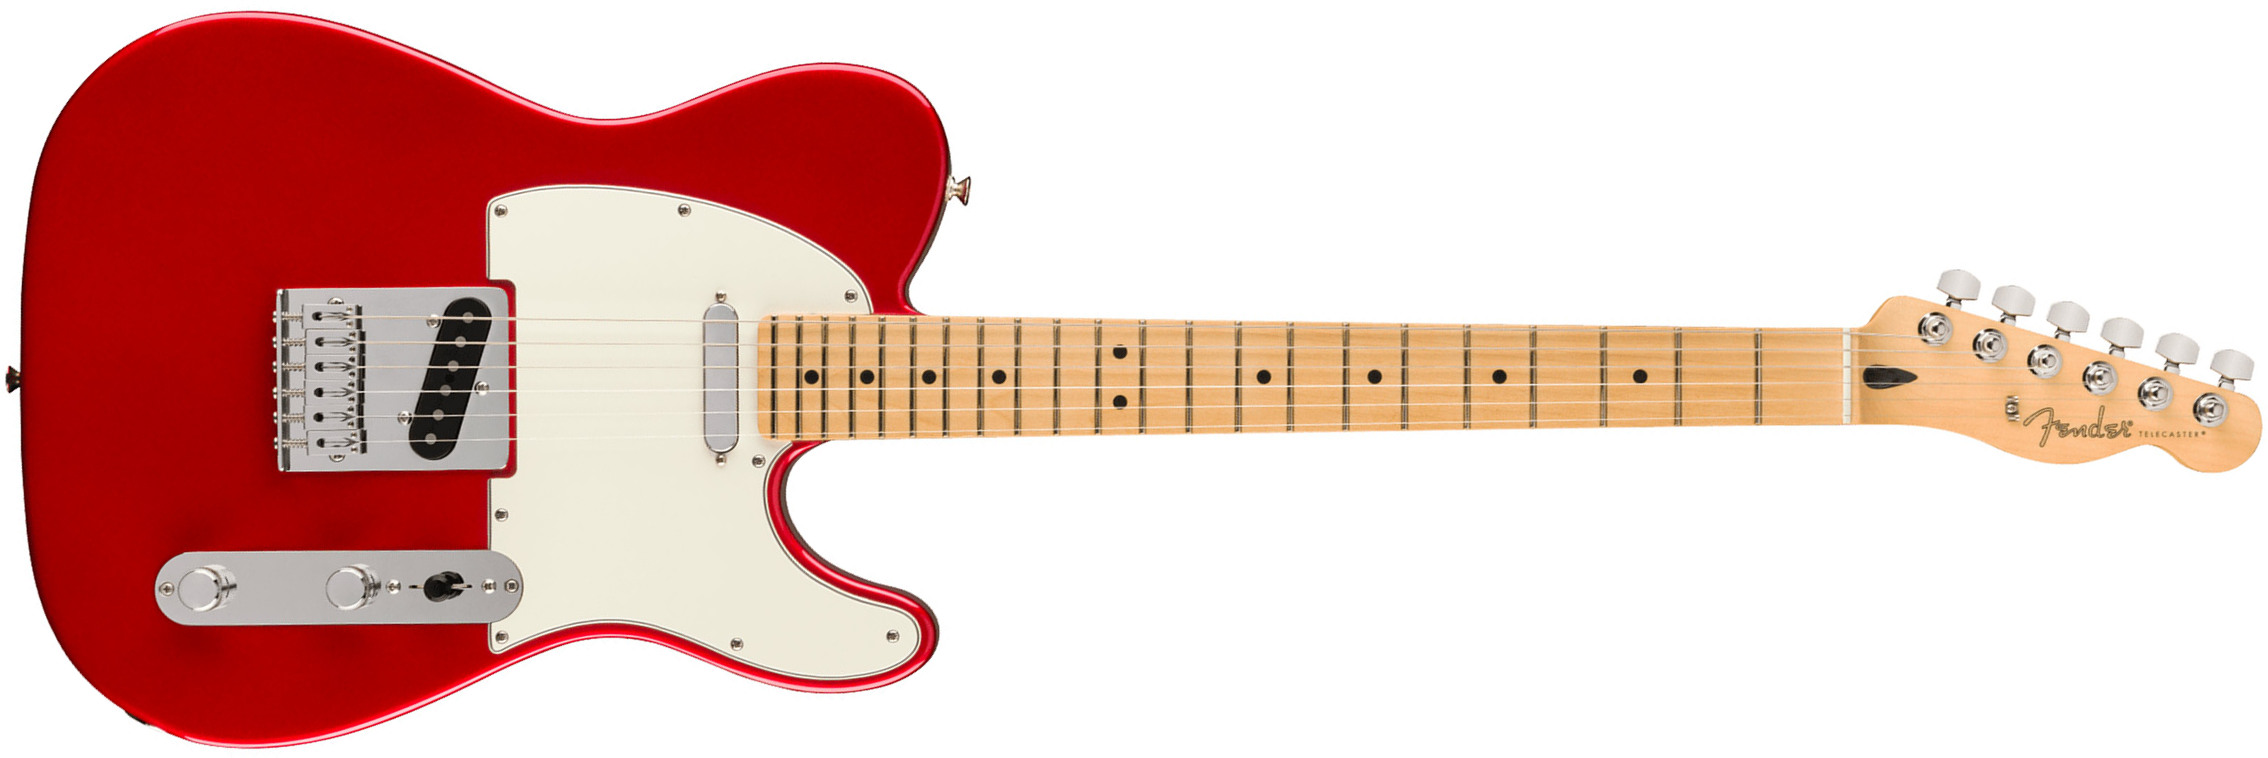 Guitare électrique forme tel Fender Player Telecaster (MEX, MN) - Candy apple red